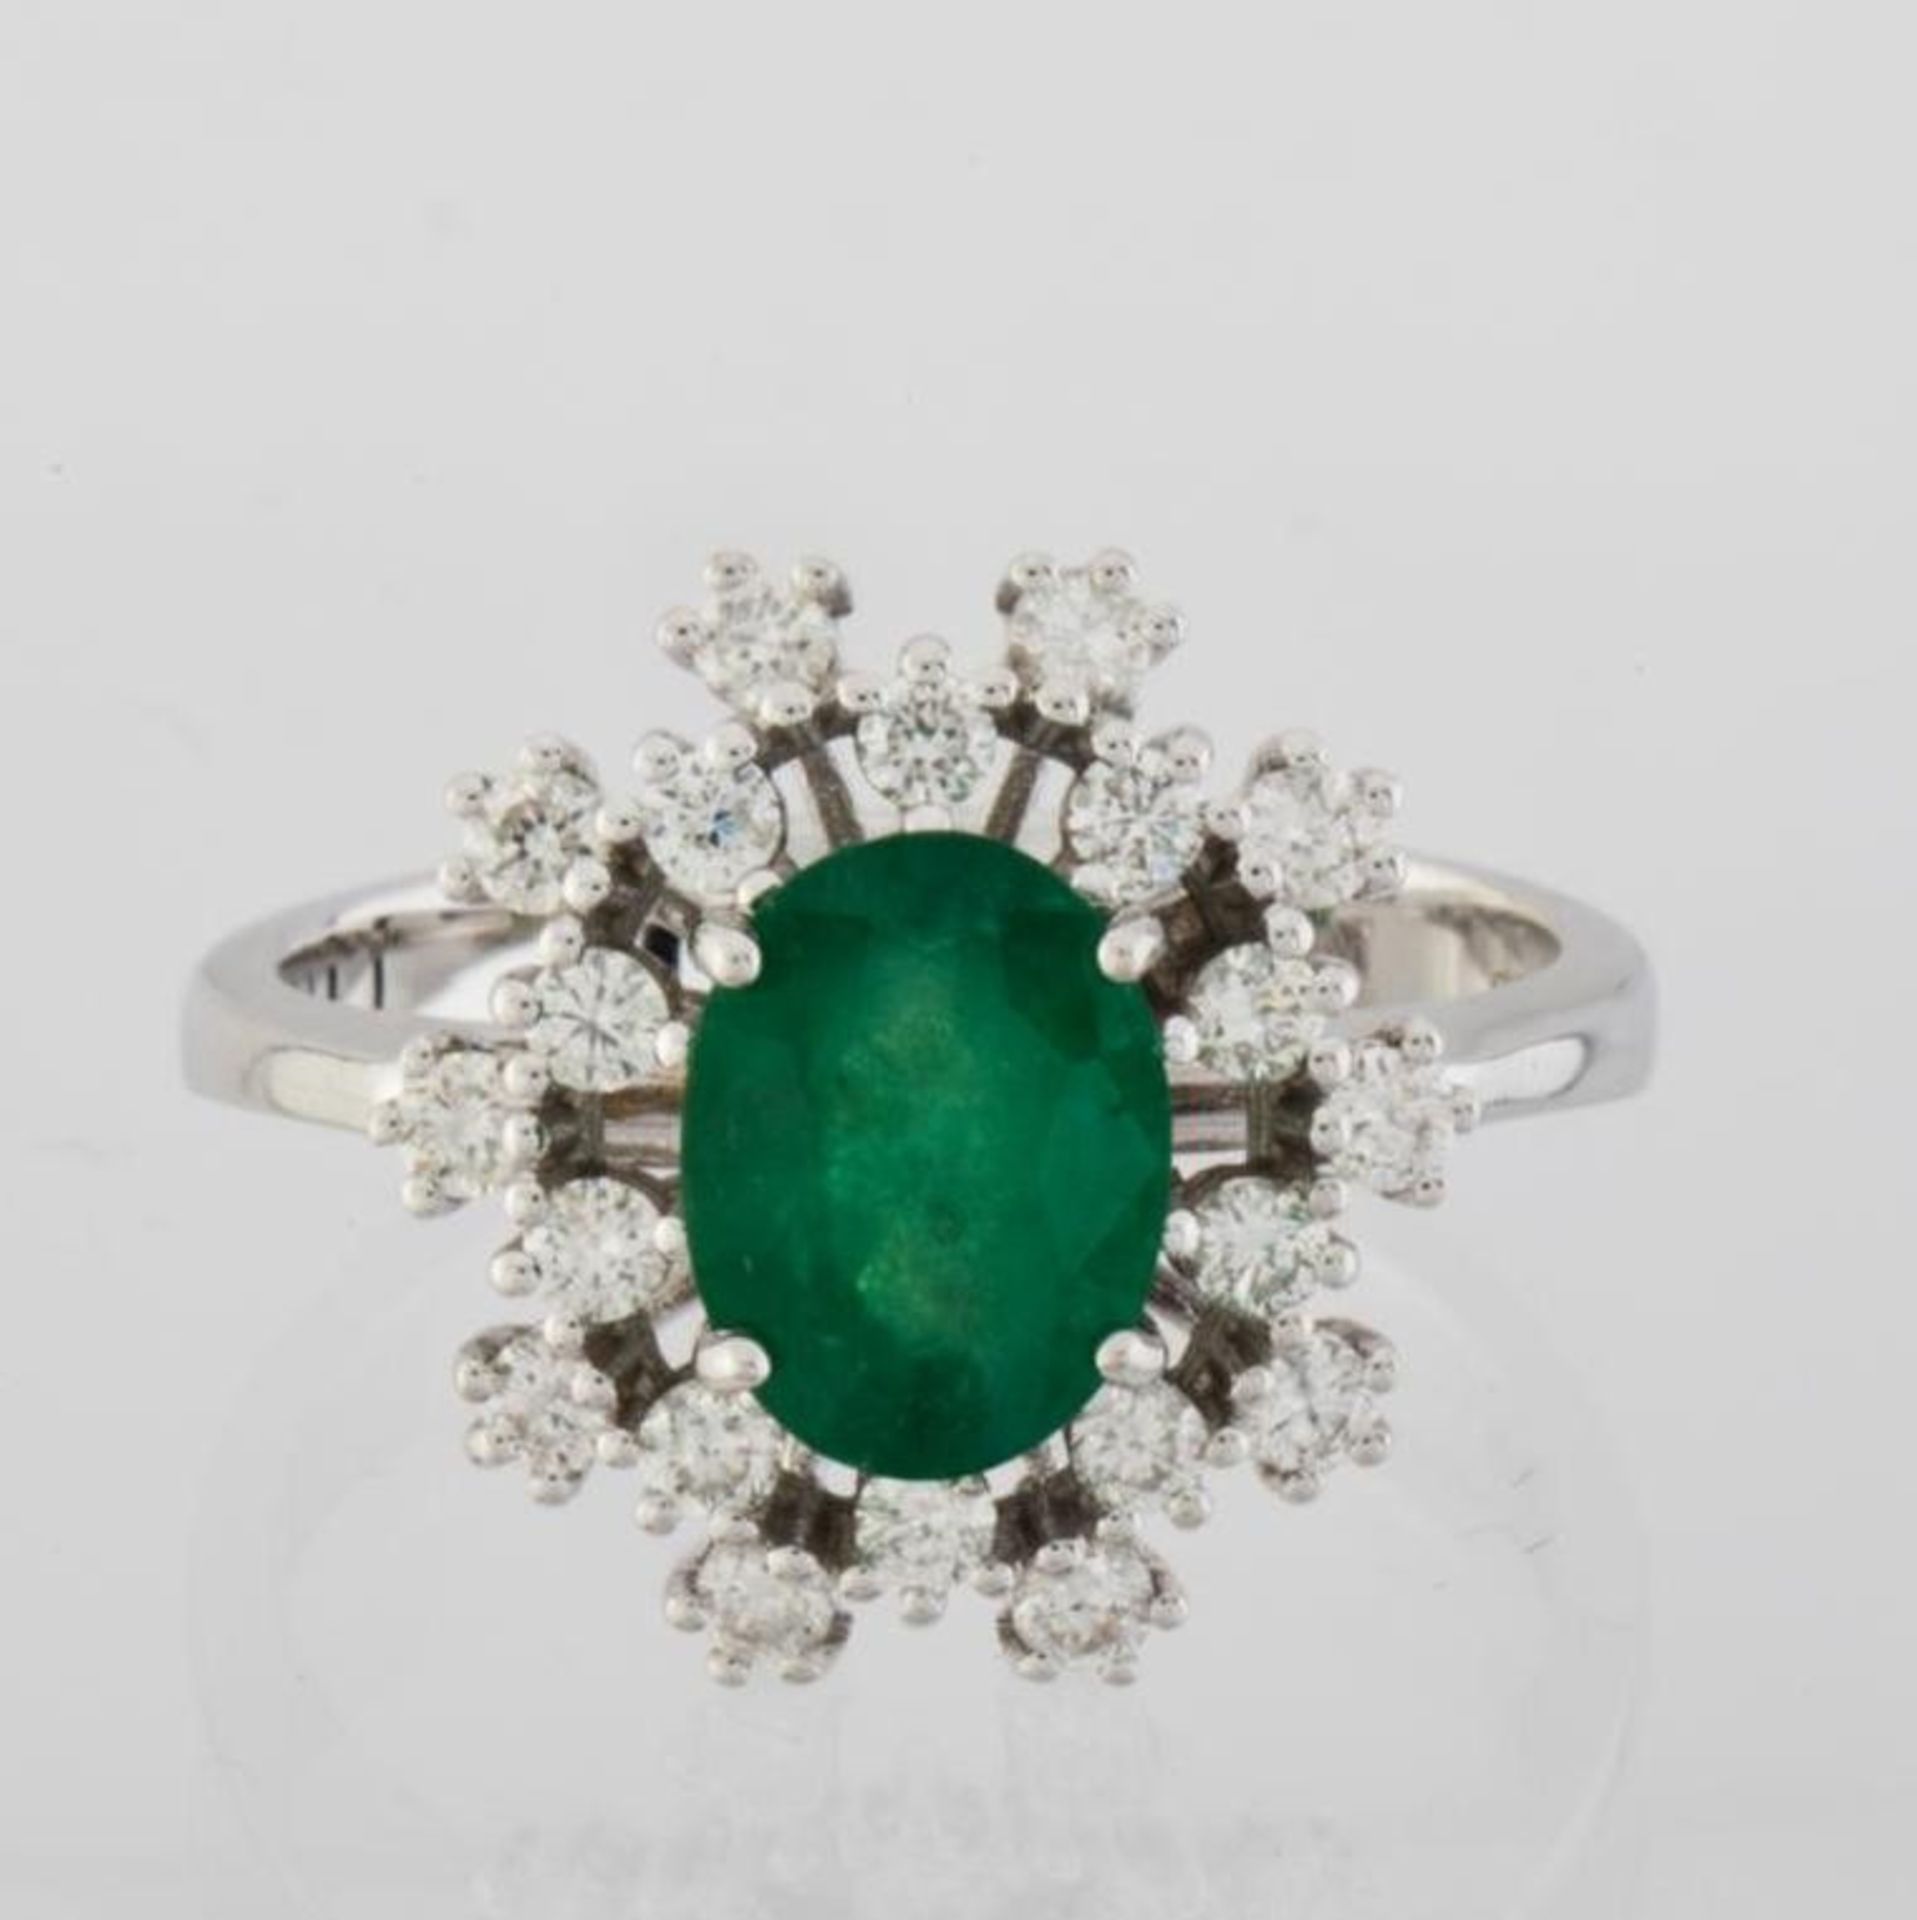 Certificated 18K White Gold Diamond & Emerald Ring - Image 4 of 4